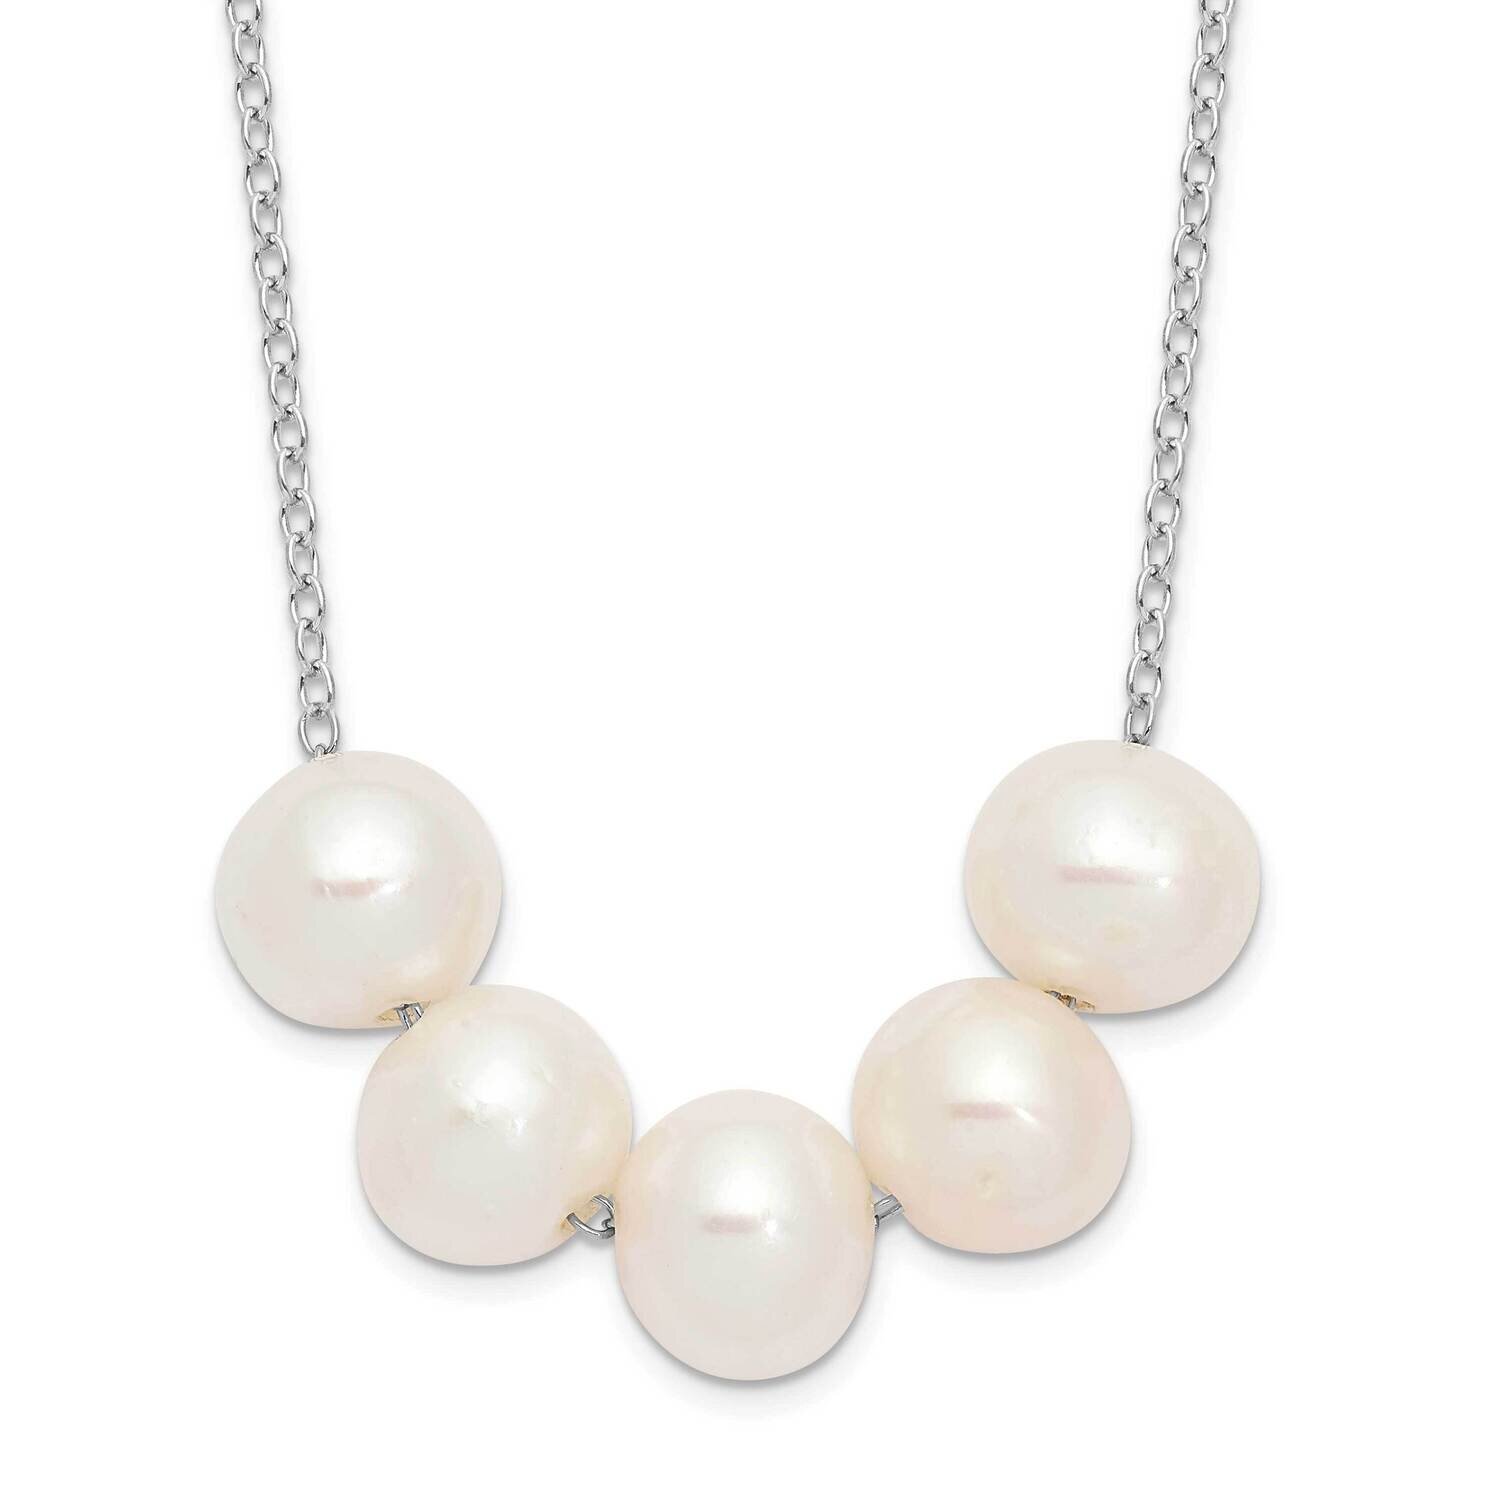 7-8mm White Semi-Round Cultured Freshwater Pearl Necklace Sterling Silver Rhodium-plated QH5668-17